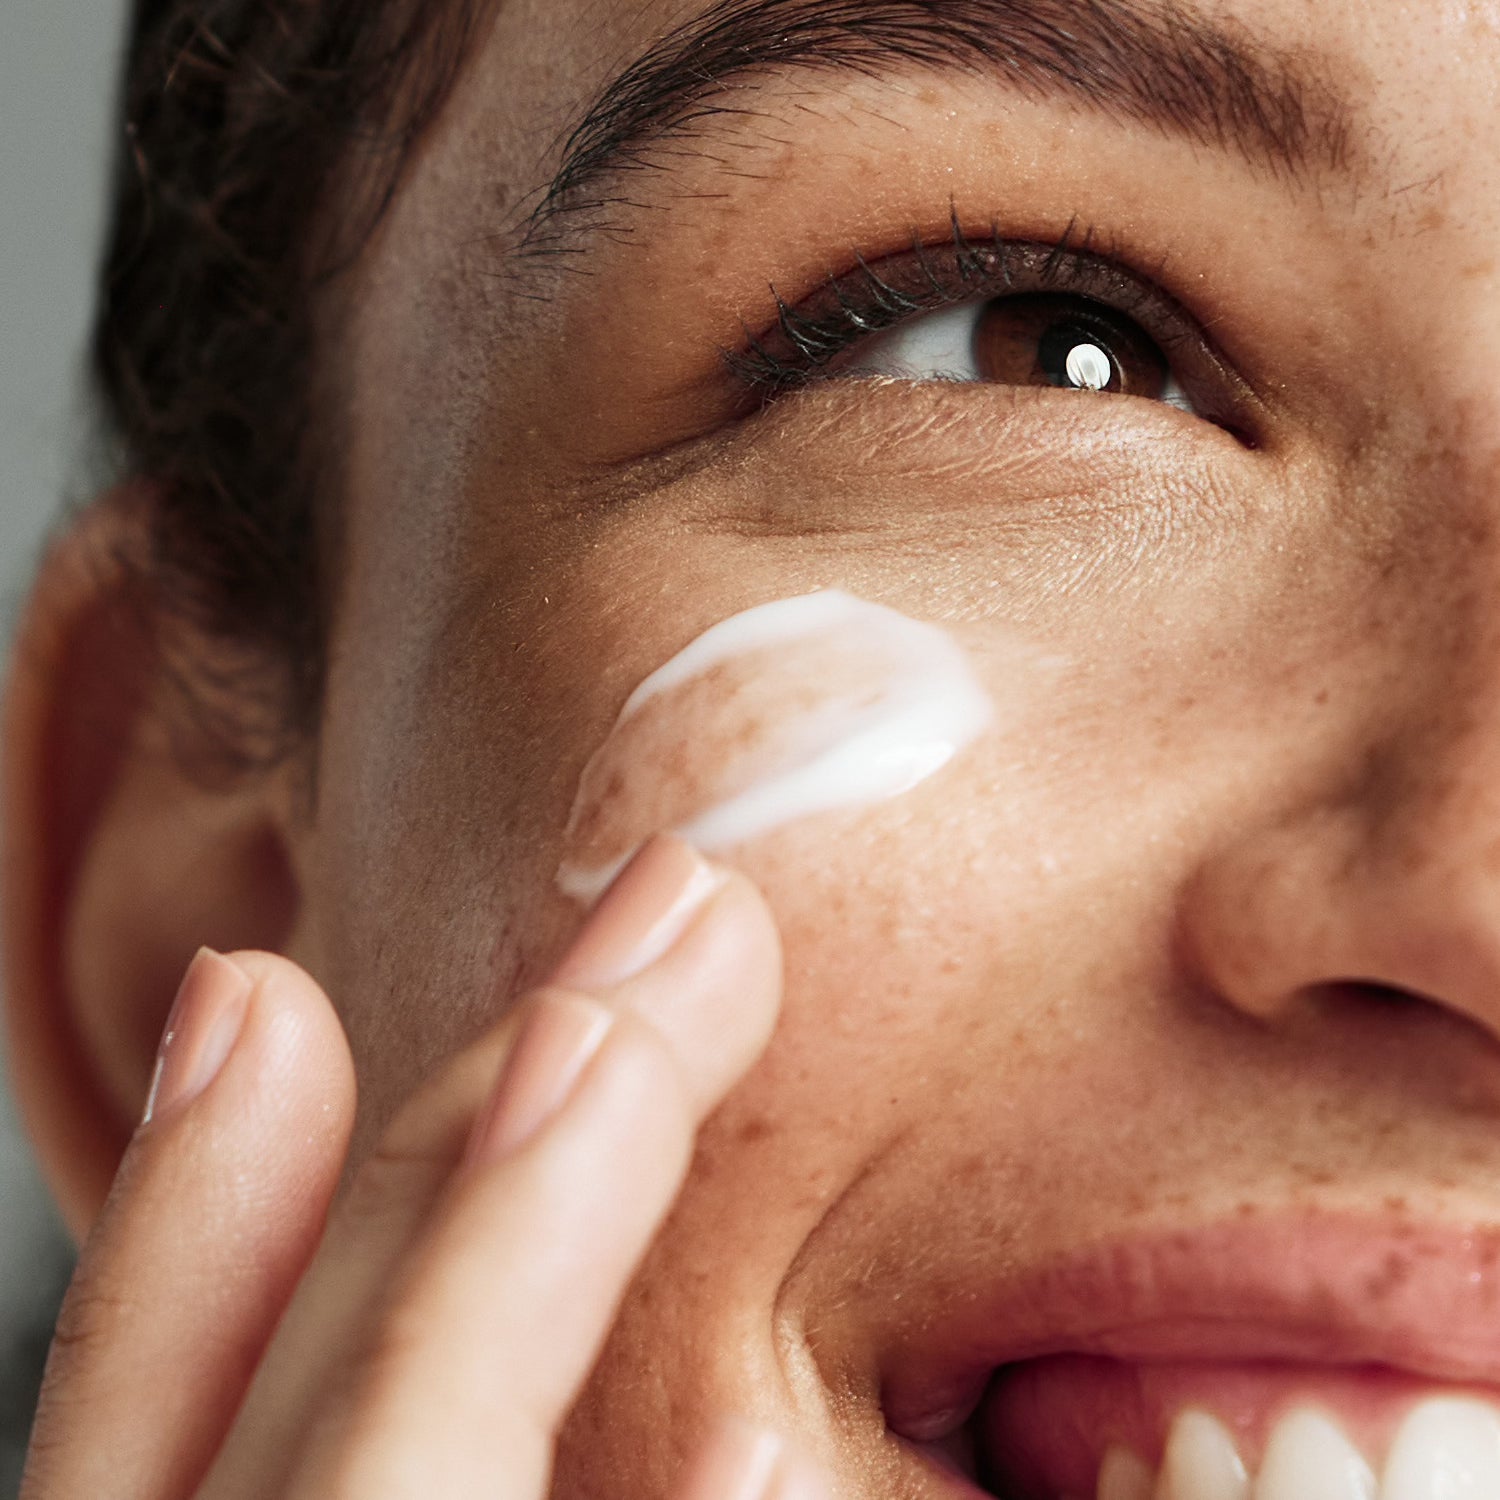 An image of a person smiling while applying a white moisturizer to their cheek with their fingertips